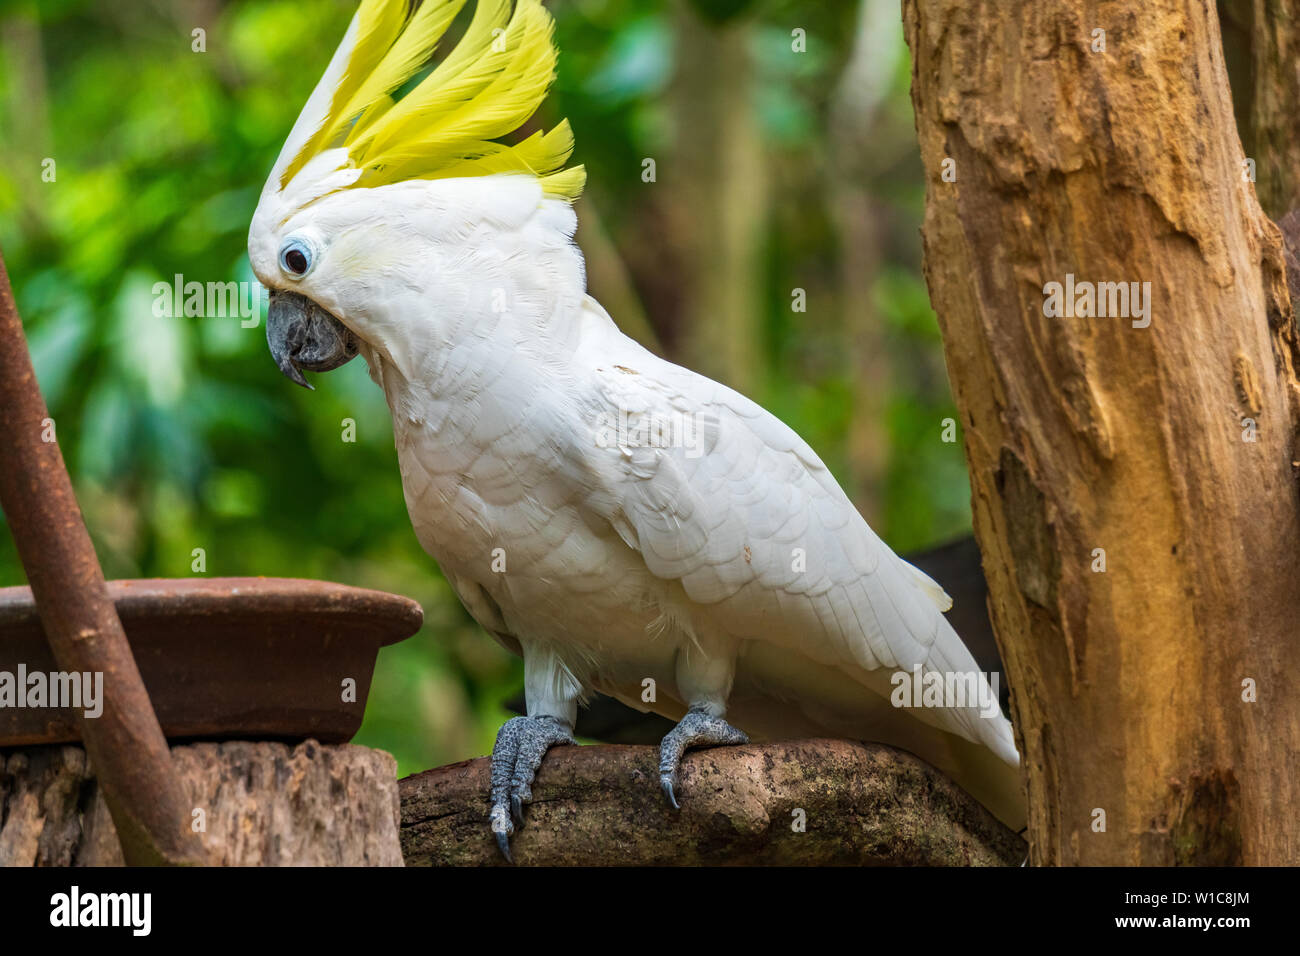 Portrait of Yellow-crested Cockatoo, Thailand Stock Photo